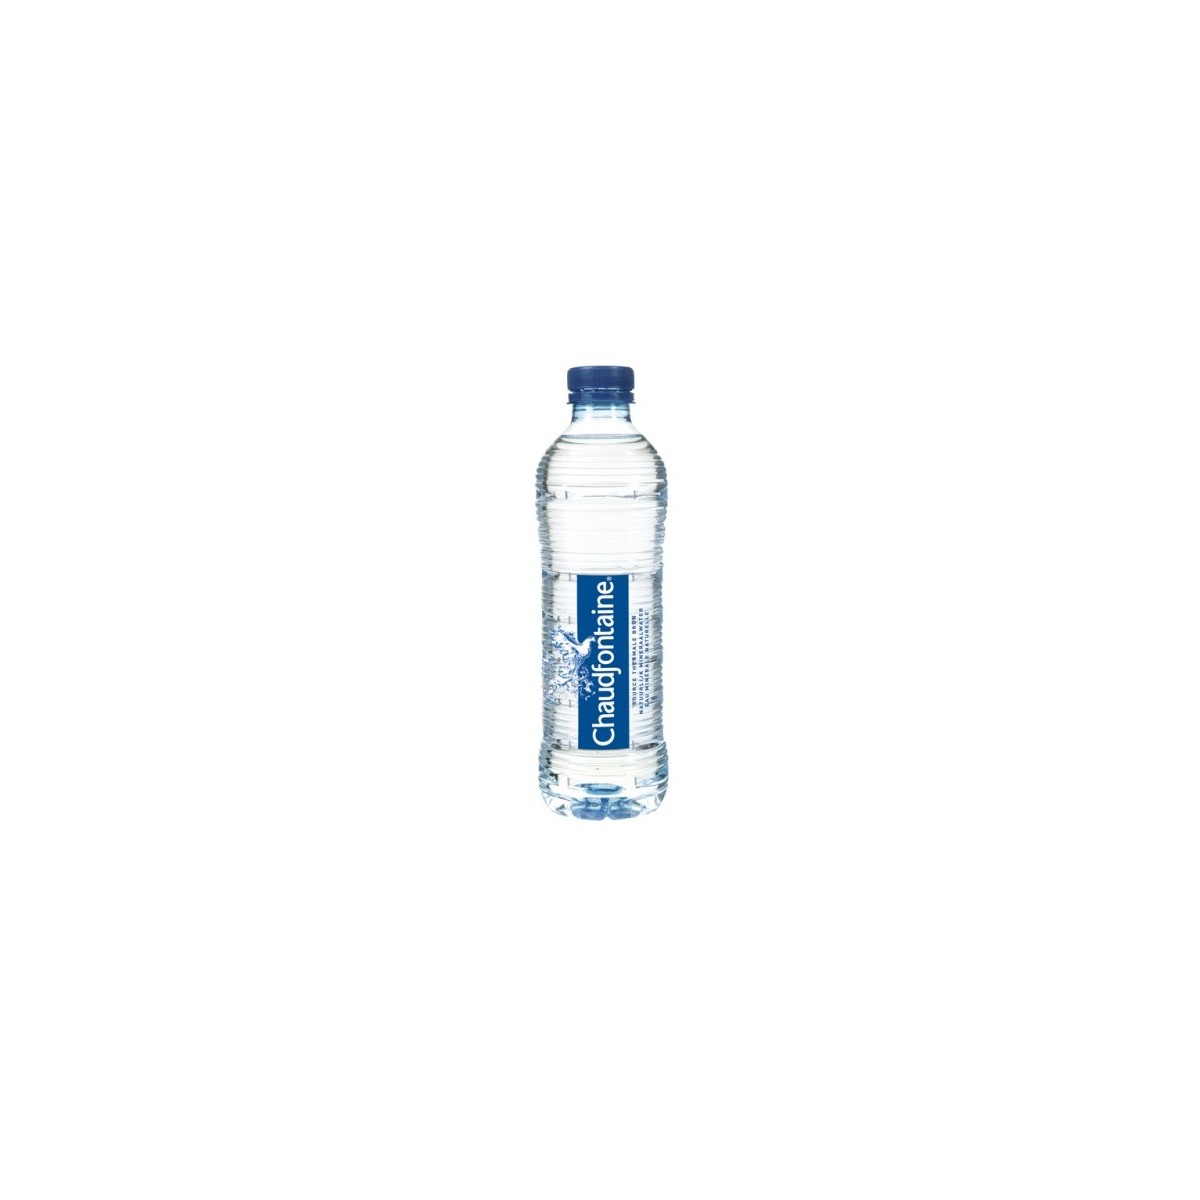 CHAUDFONTAINE STILL WATER 24 X 50CL BOTTLE  TRAY 